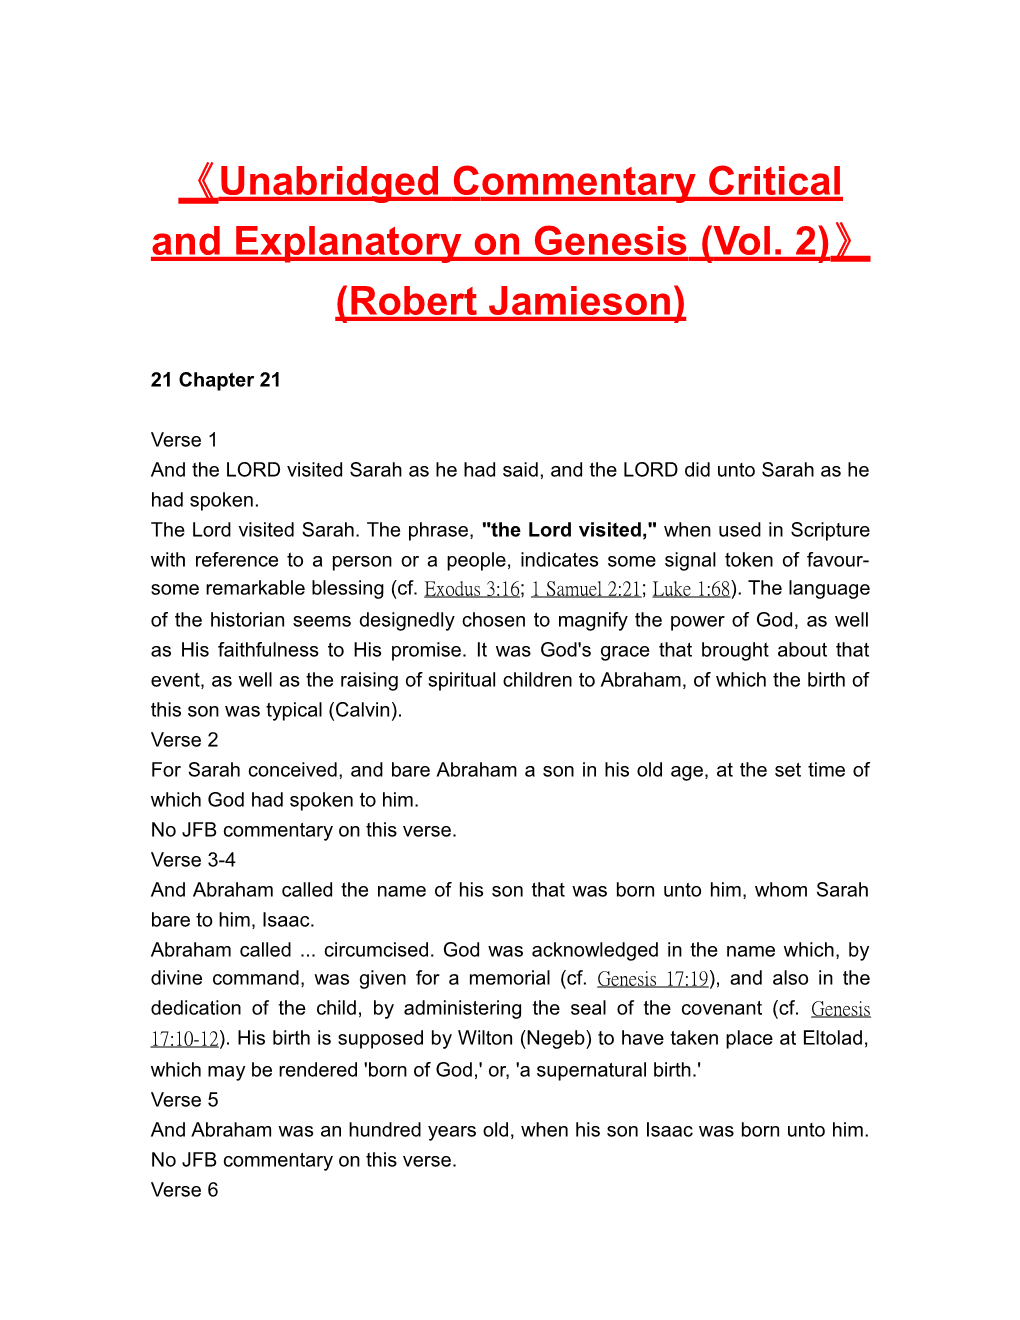 Unabridged Commentary Critical and Explanatory on Genesis (Vol. 2) (Robert Jamieson)